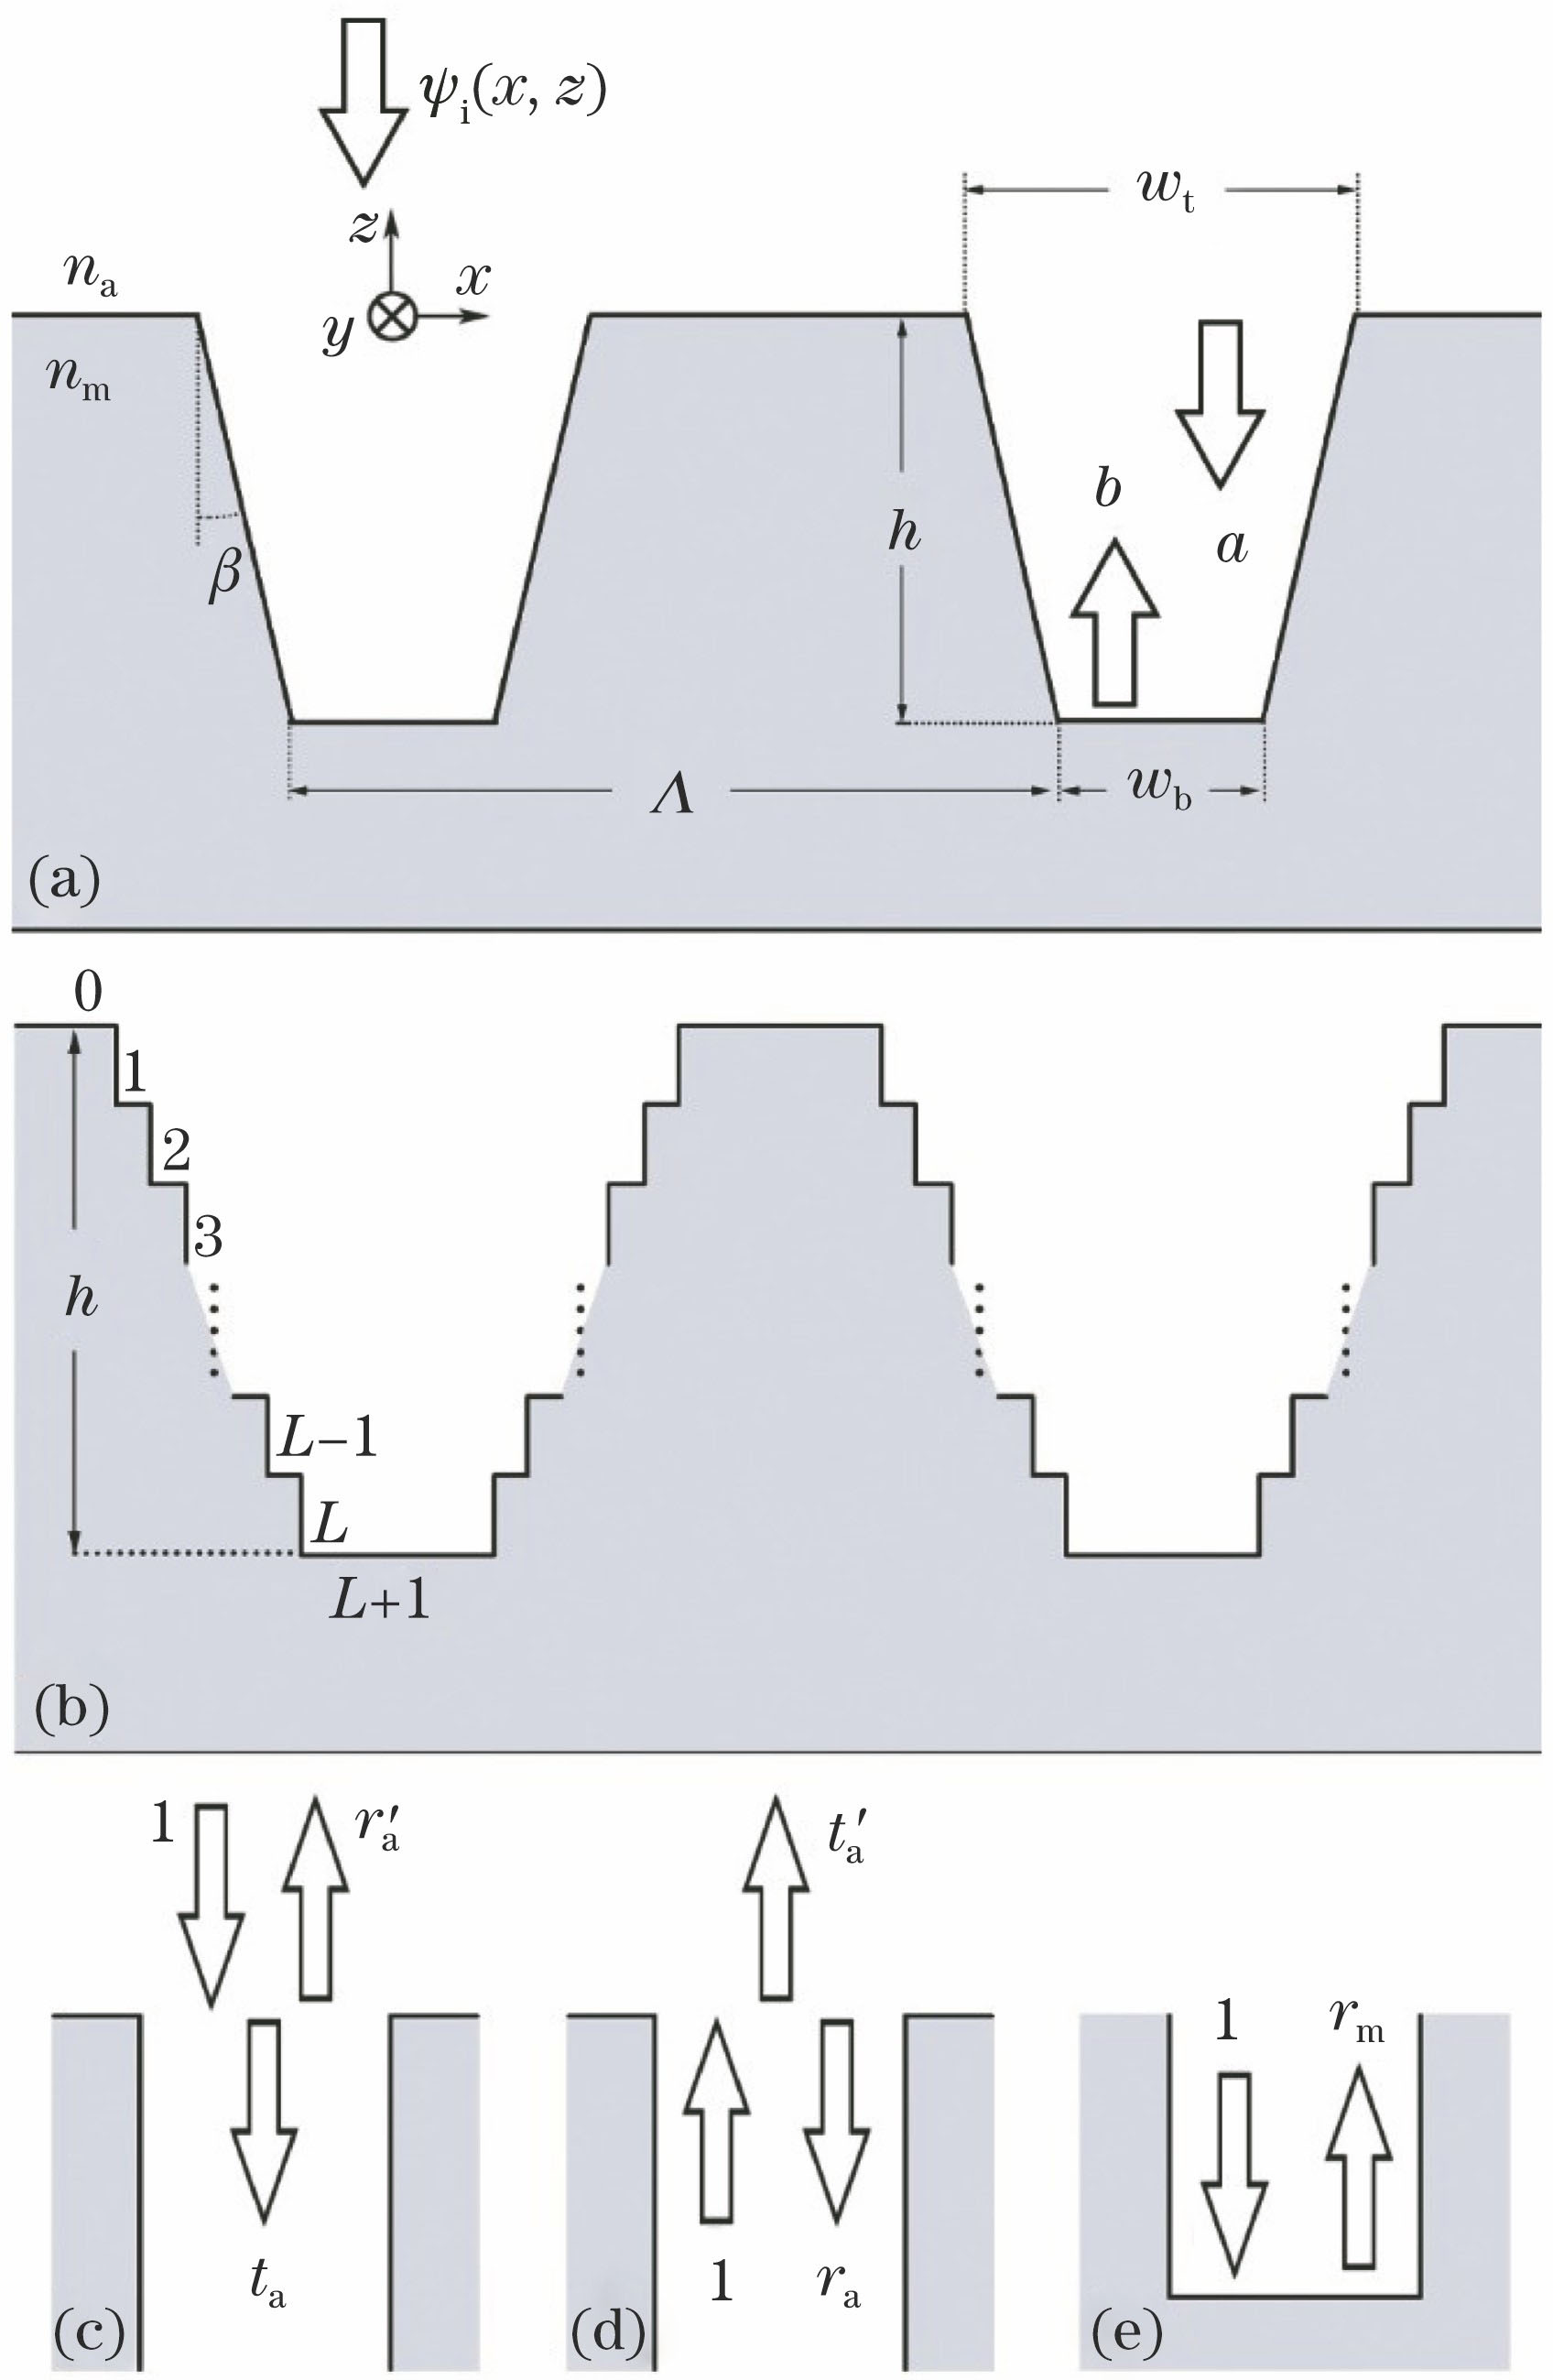 Diagrams of subwavelength trapezoidal metal groove arrays and their coordinates. (a) Structural parameters of trapezoidal metal groove and positive and negative propagation coefficients of electromagnetic field in trapezoidal groove; (b) subwavelength trapezoidal groove containing a large number of thin gratings; (c)-(e) definitions of the scattering coefficients r'a, ta,t'a, ra, and rm of rectangular grating